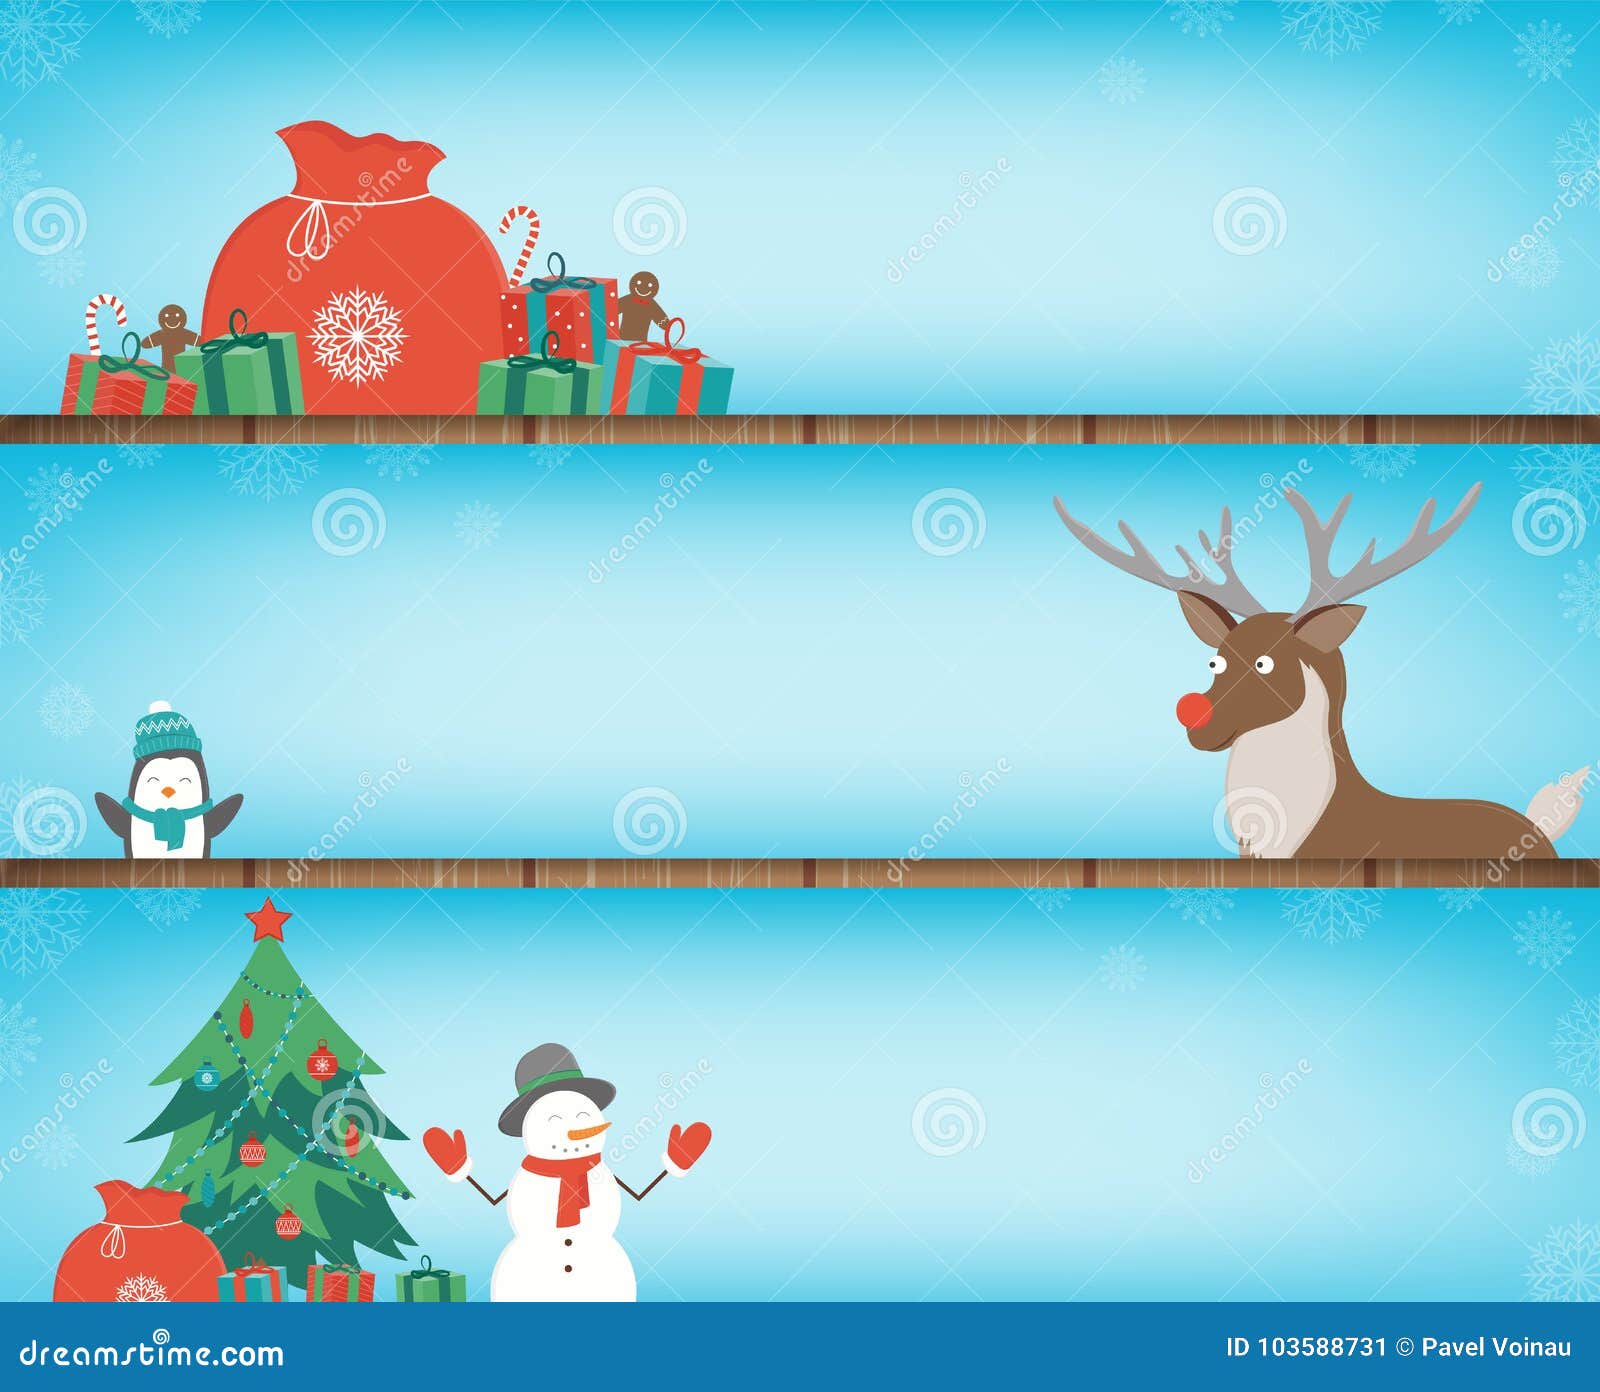 Christmas Banners Set with Decoration Elements. Santa Claus, Christmas ...